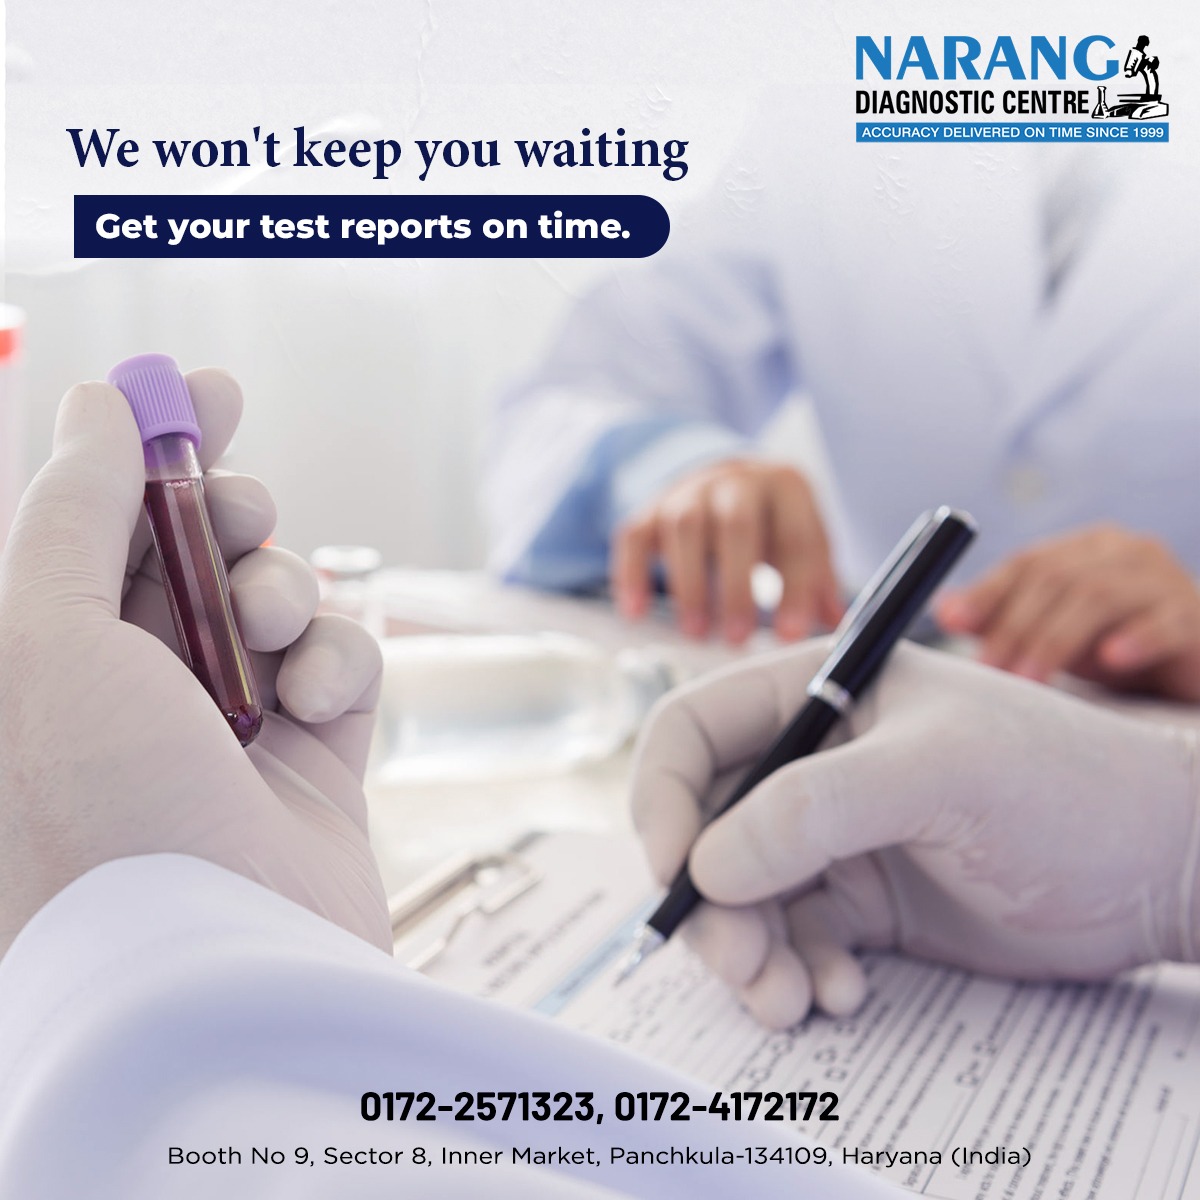 We won't keep you waiting. Get your 𝐫𝐞𝐩𝐨𝐫𝐭𝐬 on time. !
#𝐍𝐚𝐫𝐚𝐧𝐠𝐃𝐢𝐚𝐠𝐧𝐨𝐬𝐭𝐢𝐜𝐂𝐞𝐧𝐭𝐫𝐞 offers 𝐁𝐞𝐬𝐭 𝐃𝐢𝐚𝐠𝐧𝐨𝐬𝐭𝐢𝐜 𝐬𝐞𝐫𝐯𝐢𝐜𝐞𝐬 to our patients.

Book Your Test Now- 0172-2571323 or 0172-4172172 

#Diagnosticcentre #Trusteddiagnosticcentre